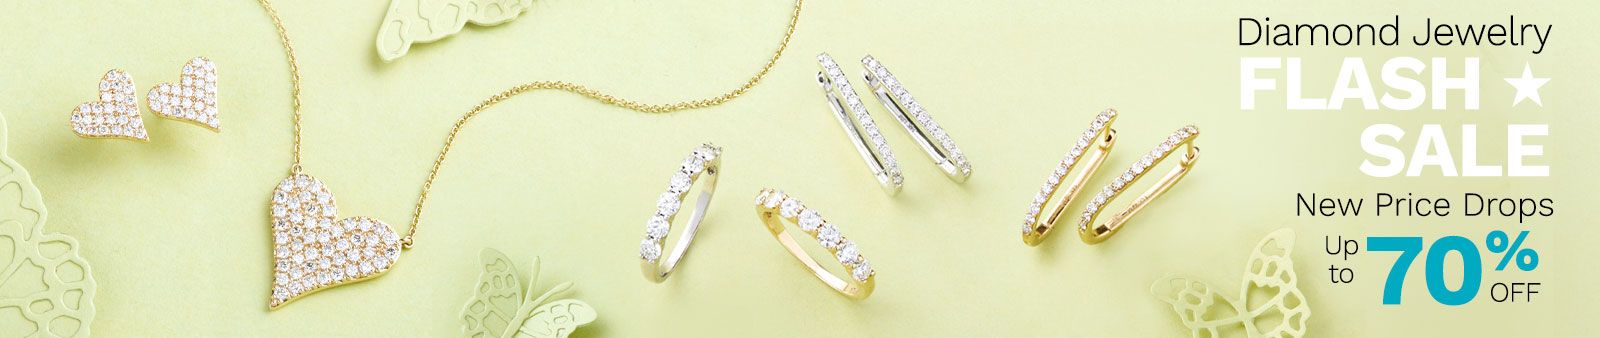 Diamond Jewelry Flash Sale New Price Drops  Up to 70% Off  + Free Shipping ft. 208-118, 208-077, 210-595, 210-597